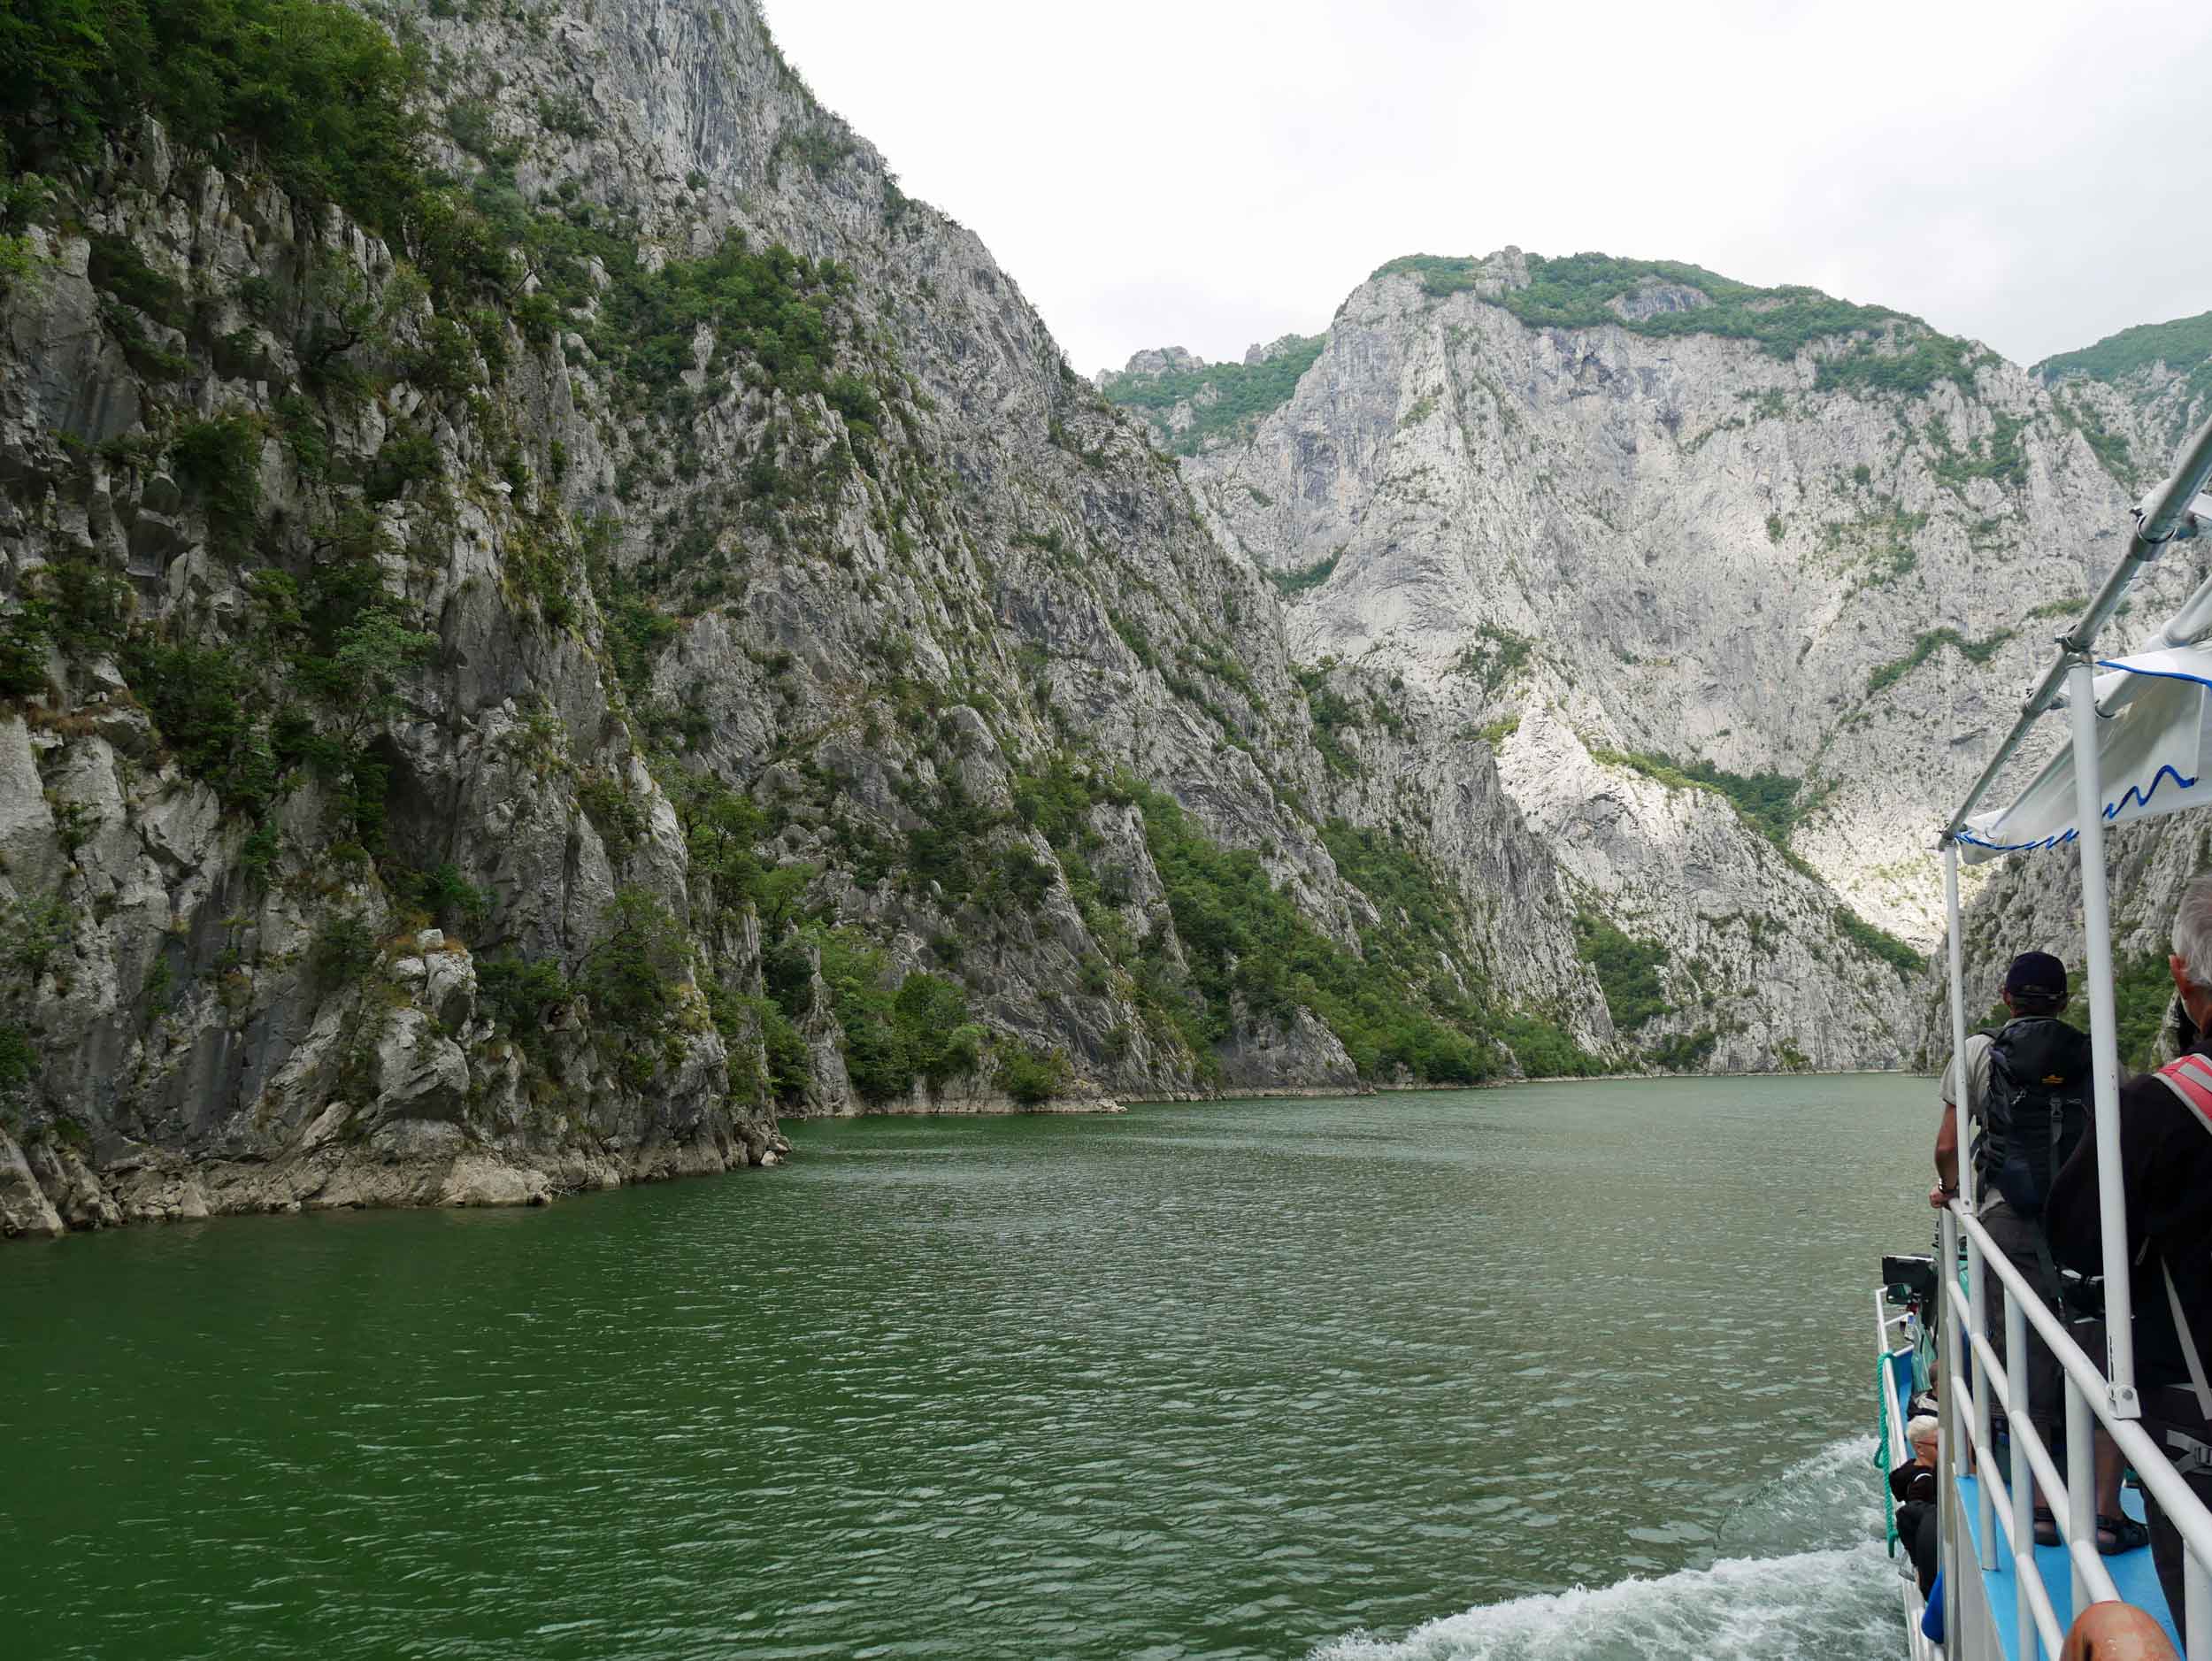  The next day, we took a ferry up the Koman Reservoir, which is surrounded by near vertical canyon walls, toward the village of Valbona where we would begin our trek (Aug 14).&nbsp; 